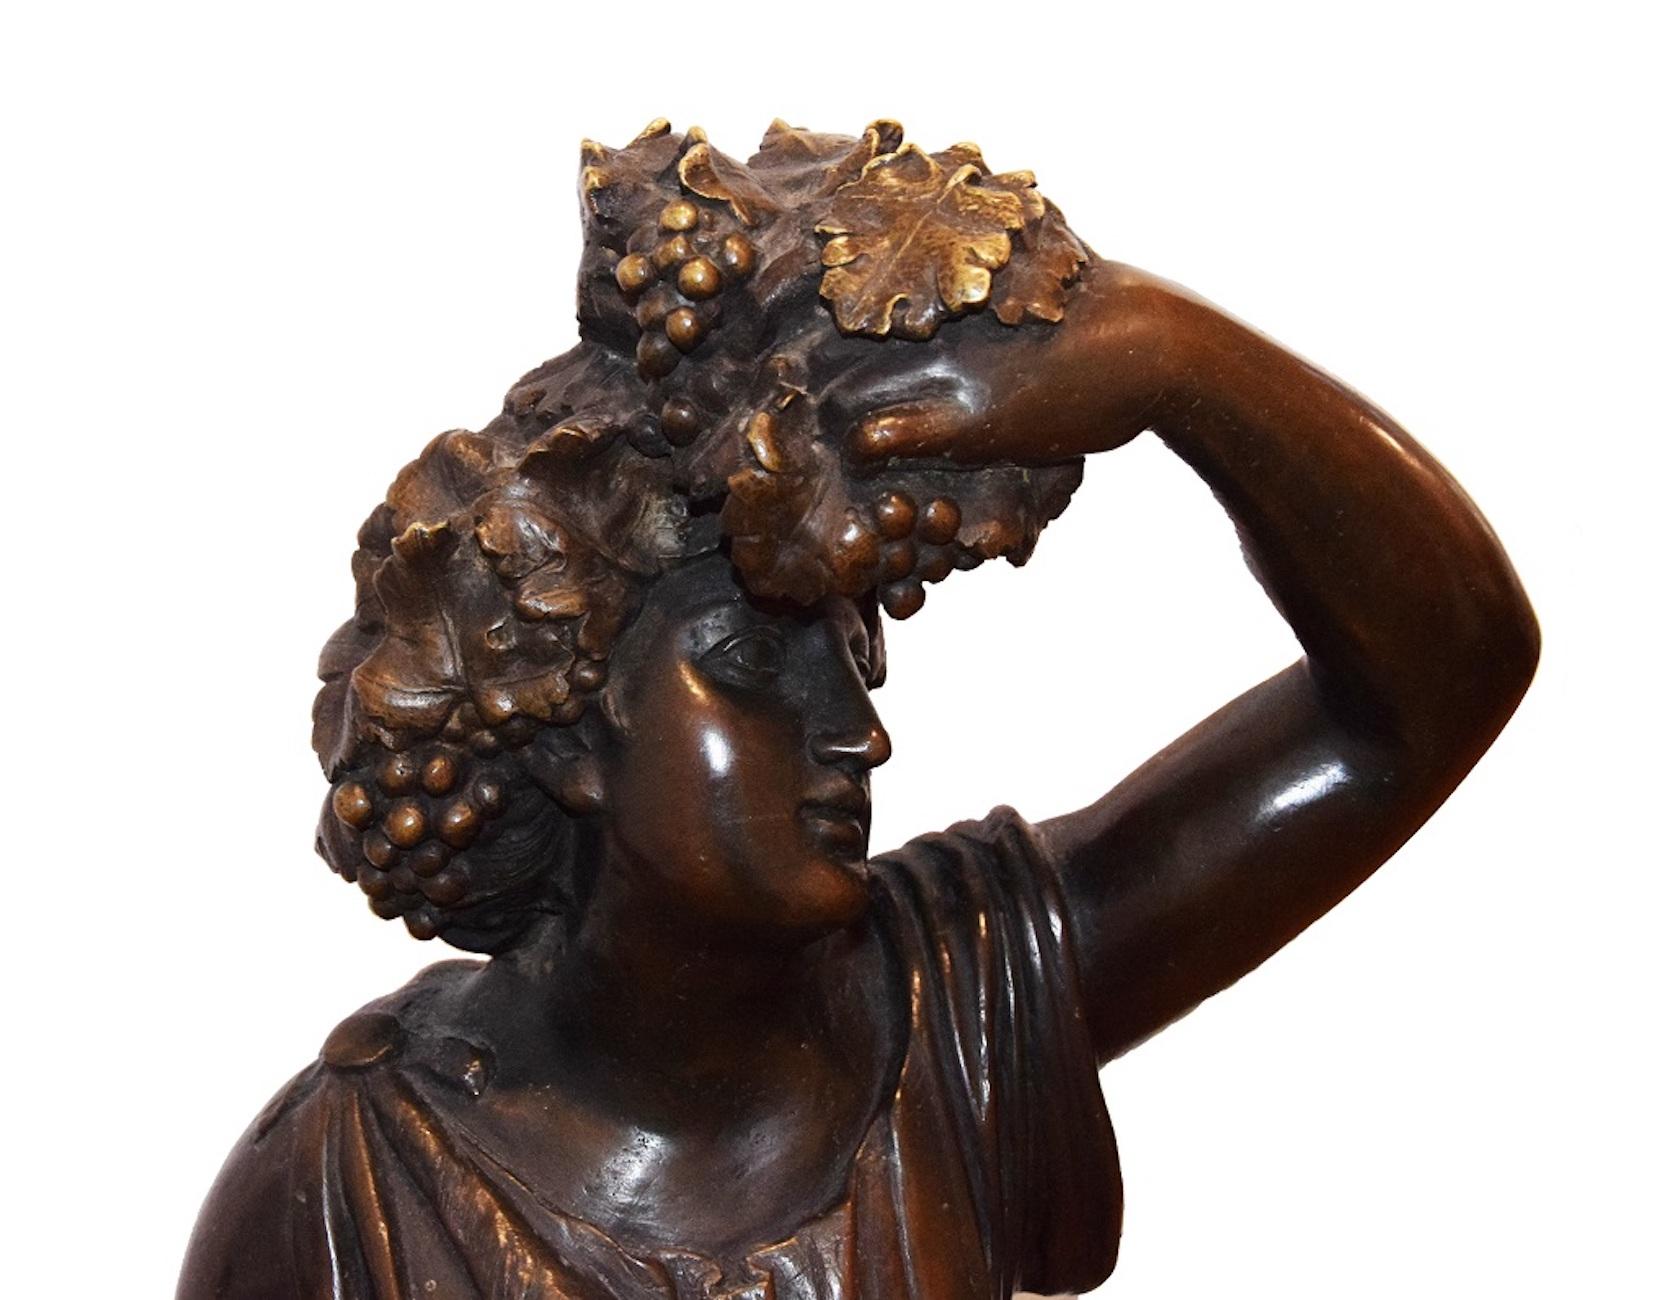 Follower of Bacchus is an original bronze sculpture realized by an Italian Sculptor in the end of the XIX century.

Bronze casting. Made in Italy.

H: 100 cm.

Excellent conditions.

Beautiful and precious work of art realized in Italy in the end of